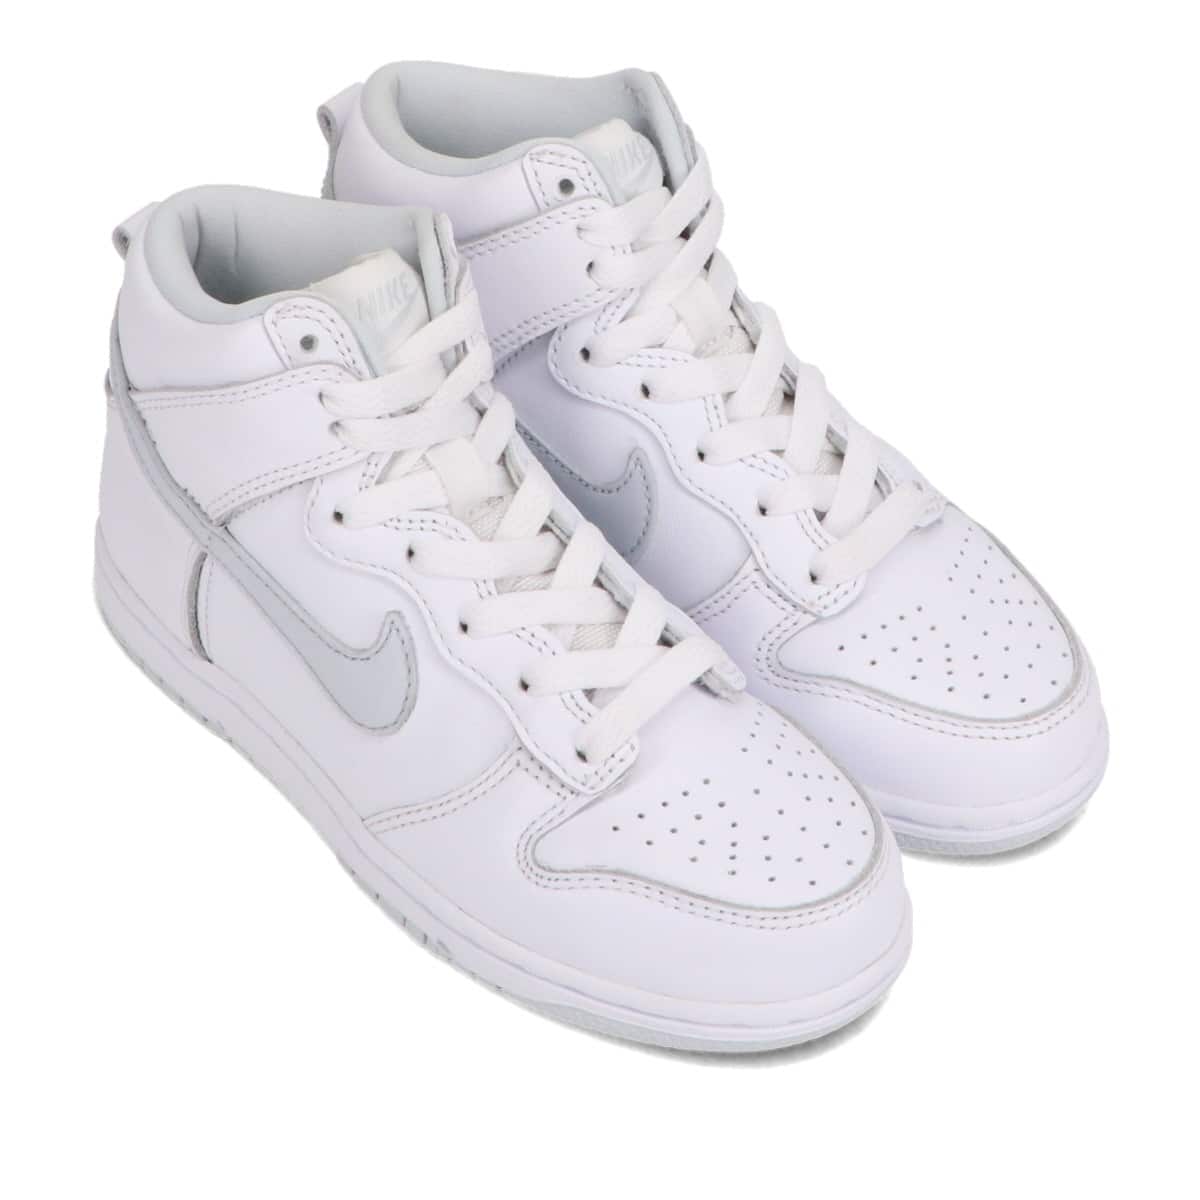 NIKE DUNK HIGH SP PS WHITE/PURE PLATINUM 20HO-S